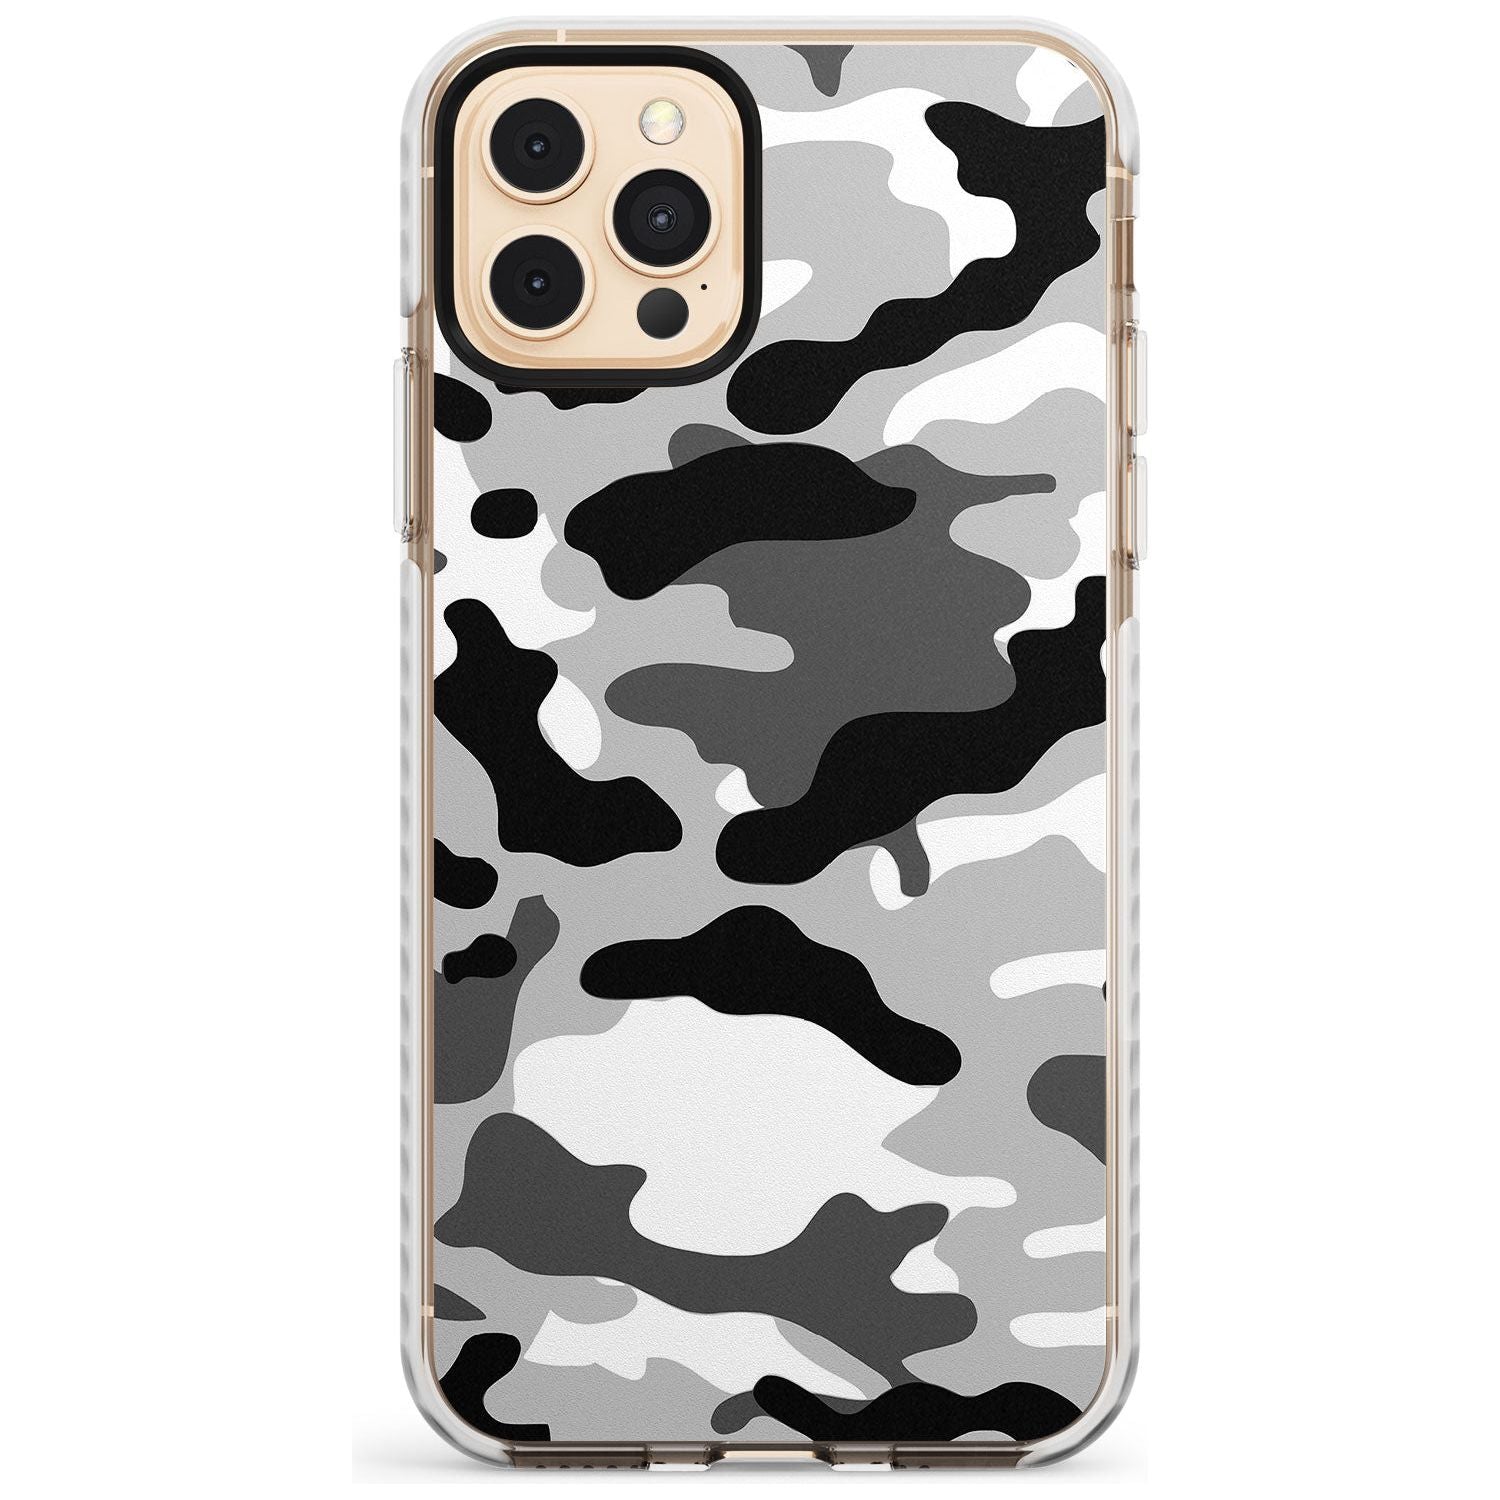 Grey Camo Impact Phone Case for iPhone 11 Pro Max